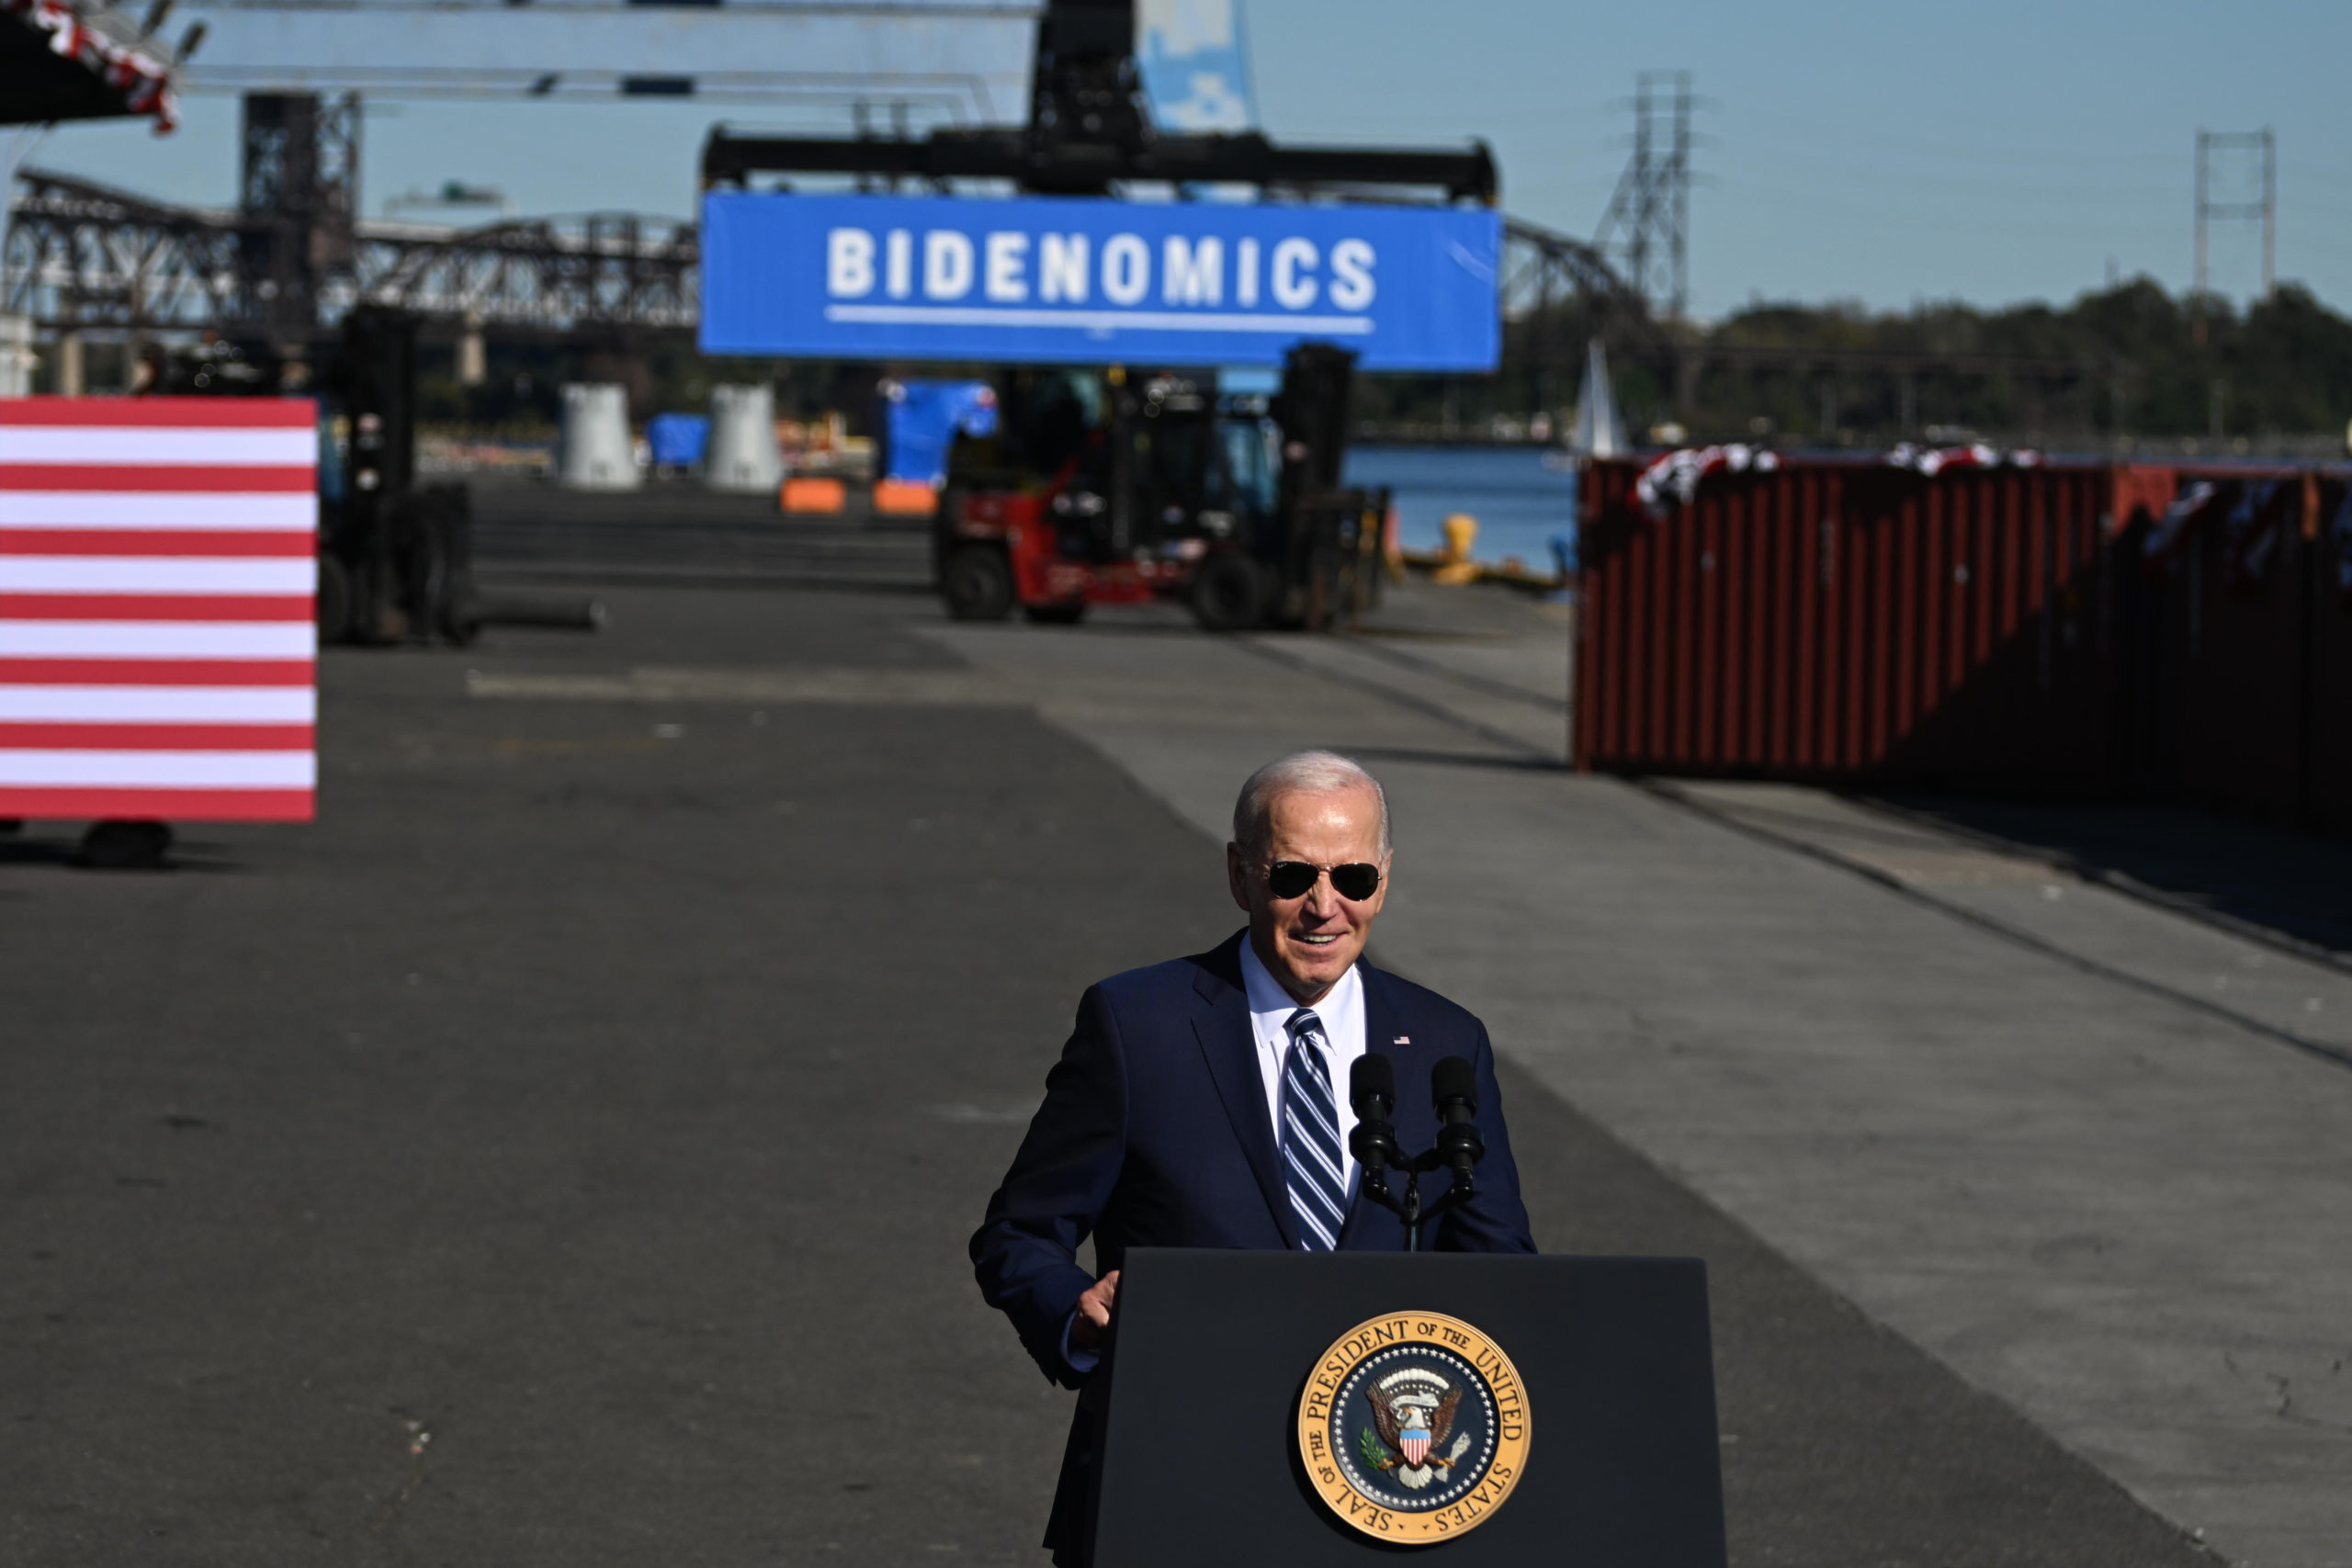 U.S. President Joe Biden speaks at Tioga Marine Terminal on October 13, 2023 in Philadelphia, Pennsylvania. Biden discussed how his Bidenomics agenda is creating good-paying union jobs, investing in infrastructure, accelerating the transition to a clean energy future, and combatting the climate crisis.(Photo by Mark Makela/Getty Images)